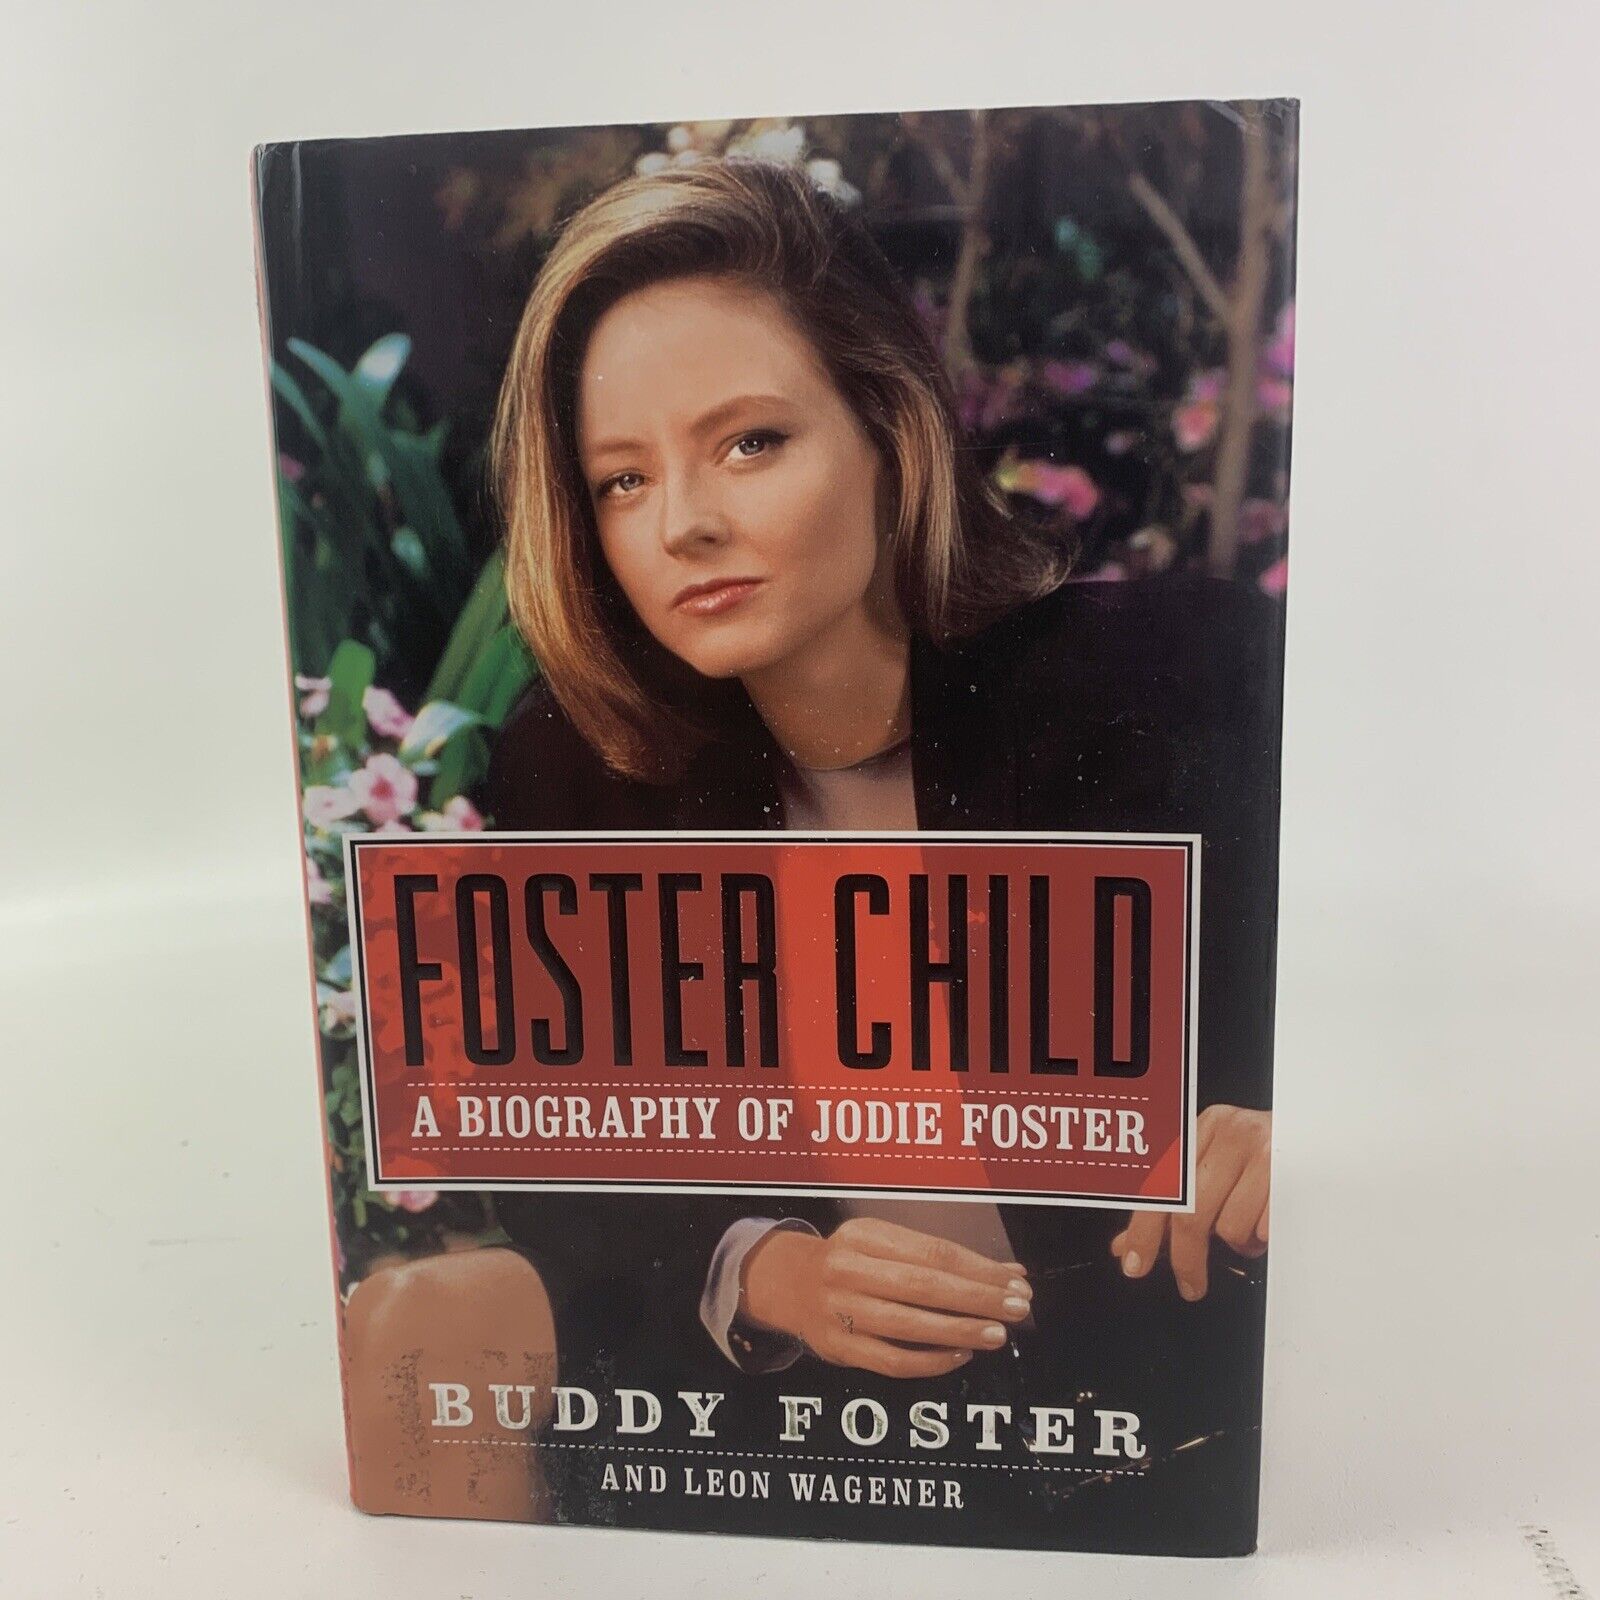 Foster Child : A Biography of Jodie Foster by Leon Wagener and Buddy Foster...